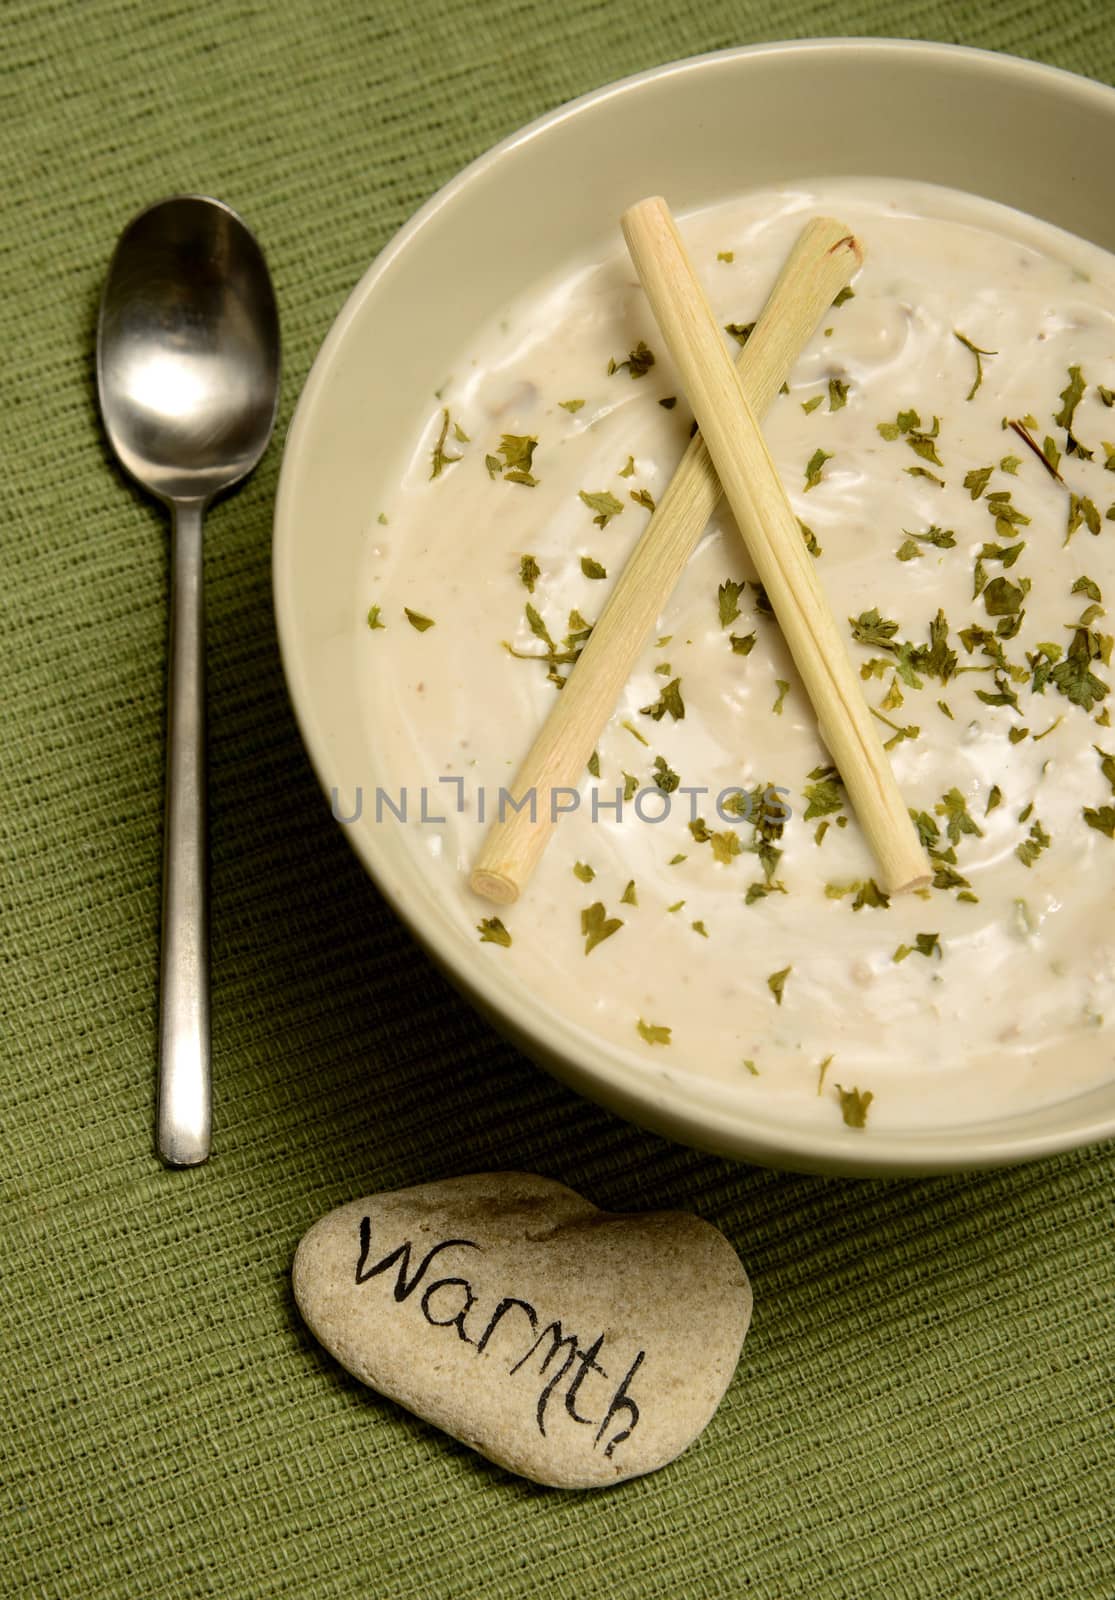 creamy lemongrass soup for warmth by ftlaudgirl